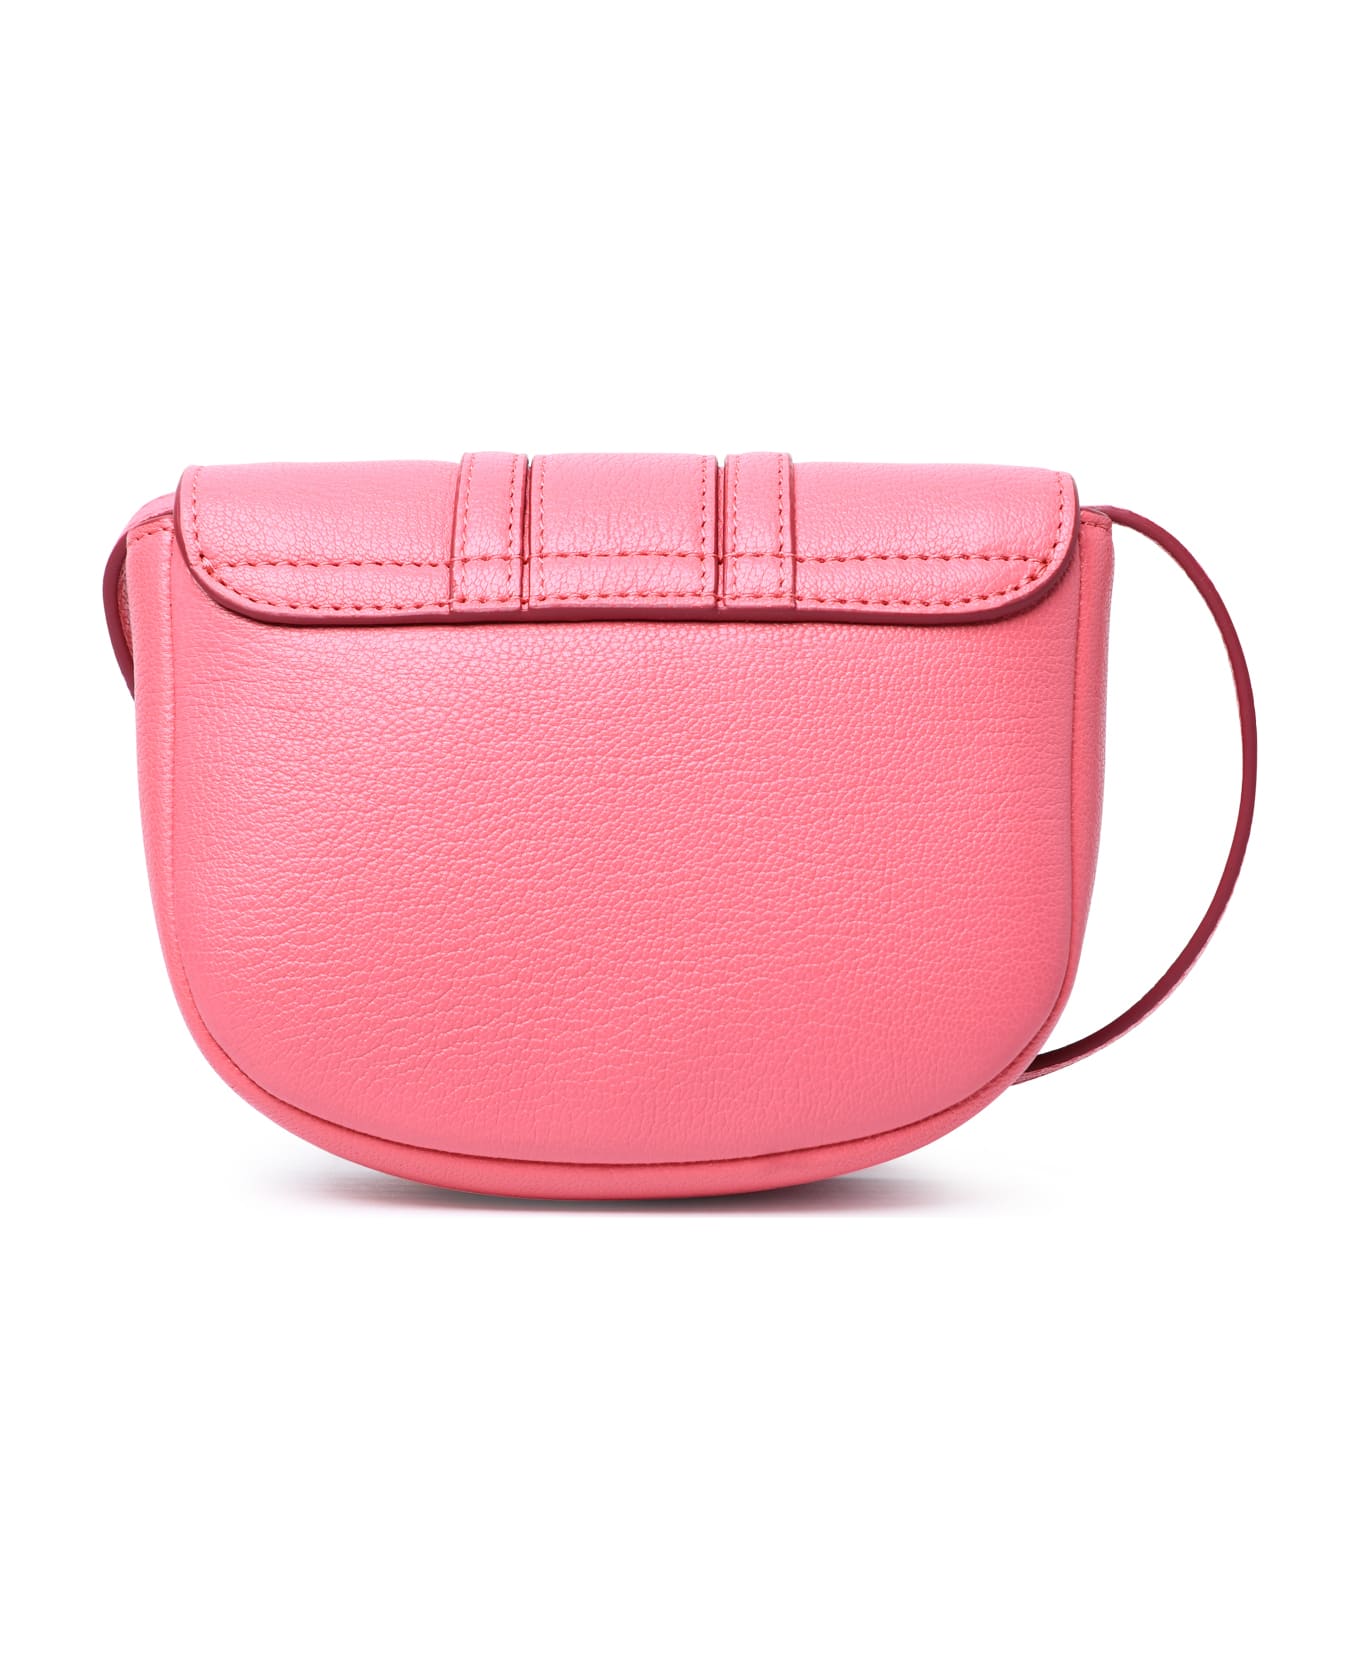 See by Chloé Small 'hana' Pink Leather Bag - Pink